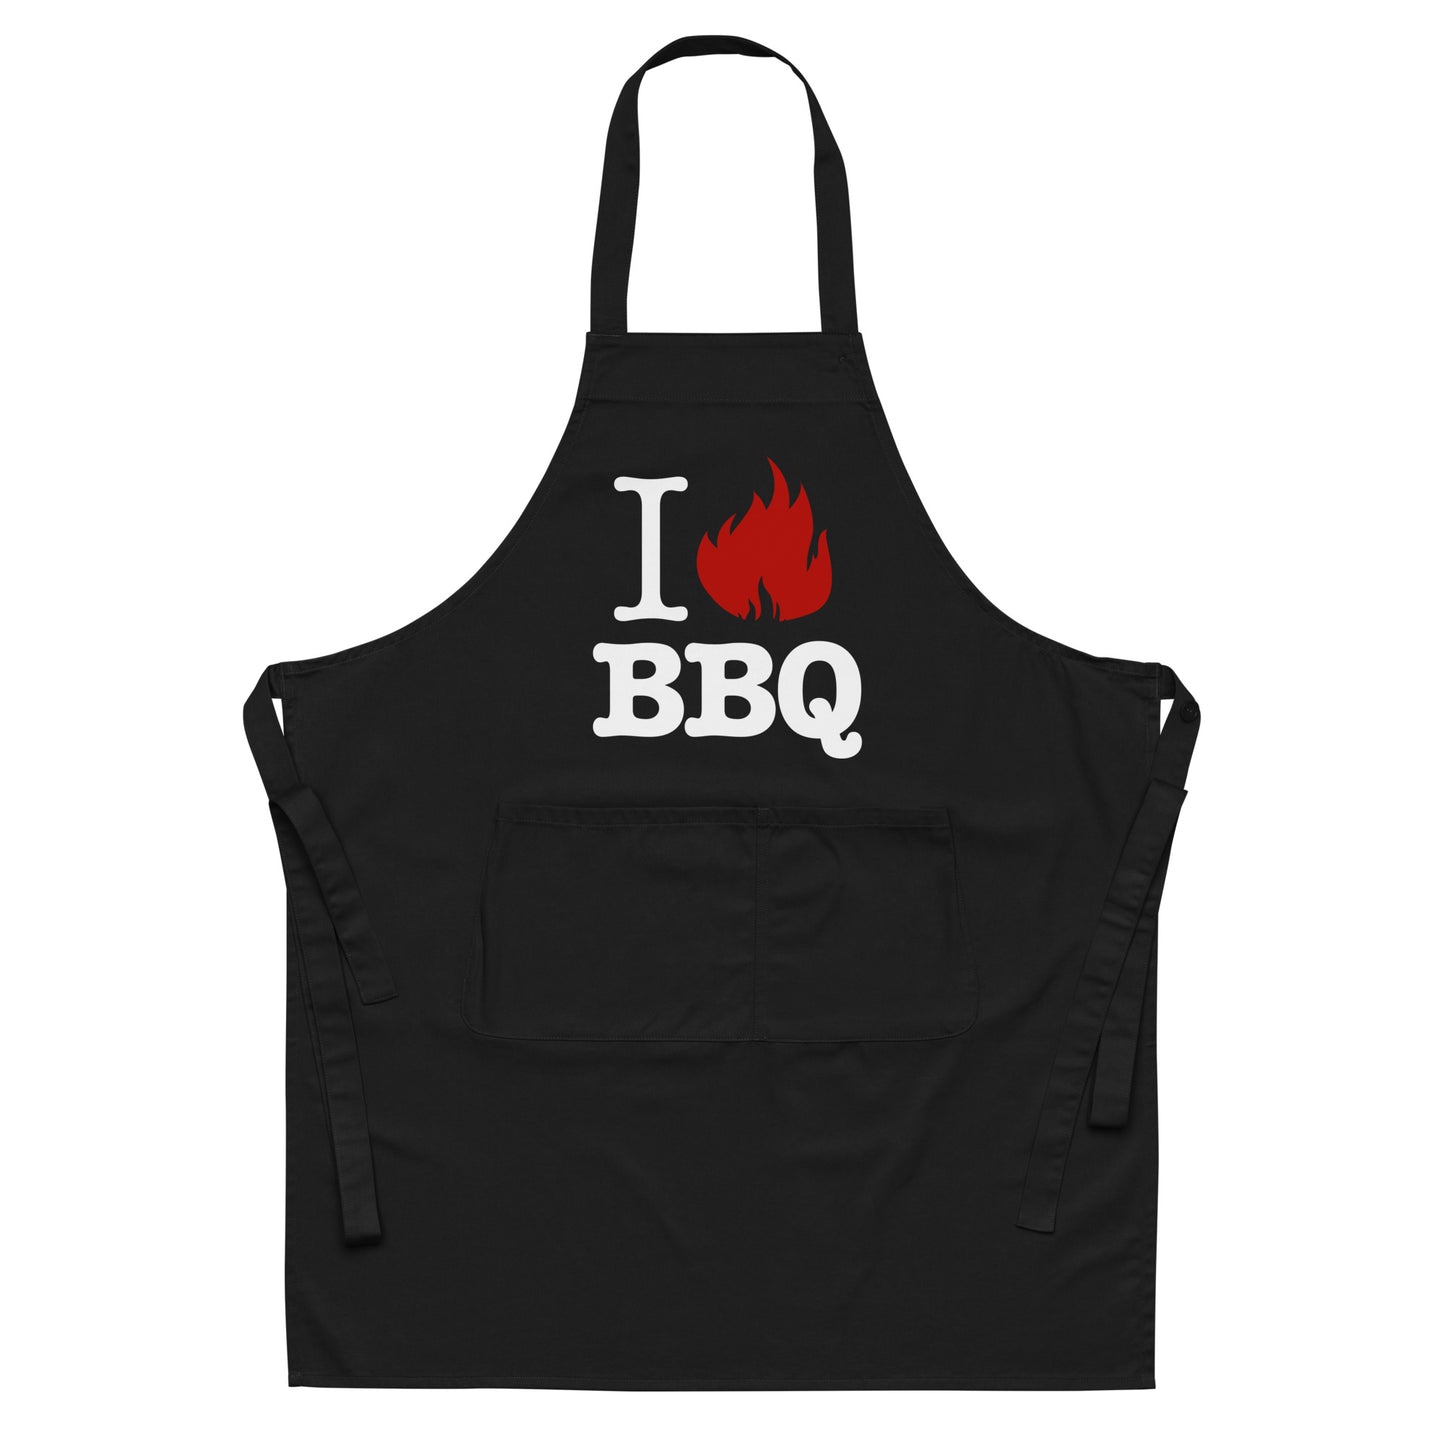 black apron with text "I love BBQ"